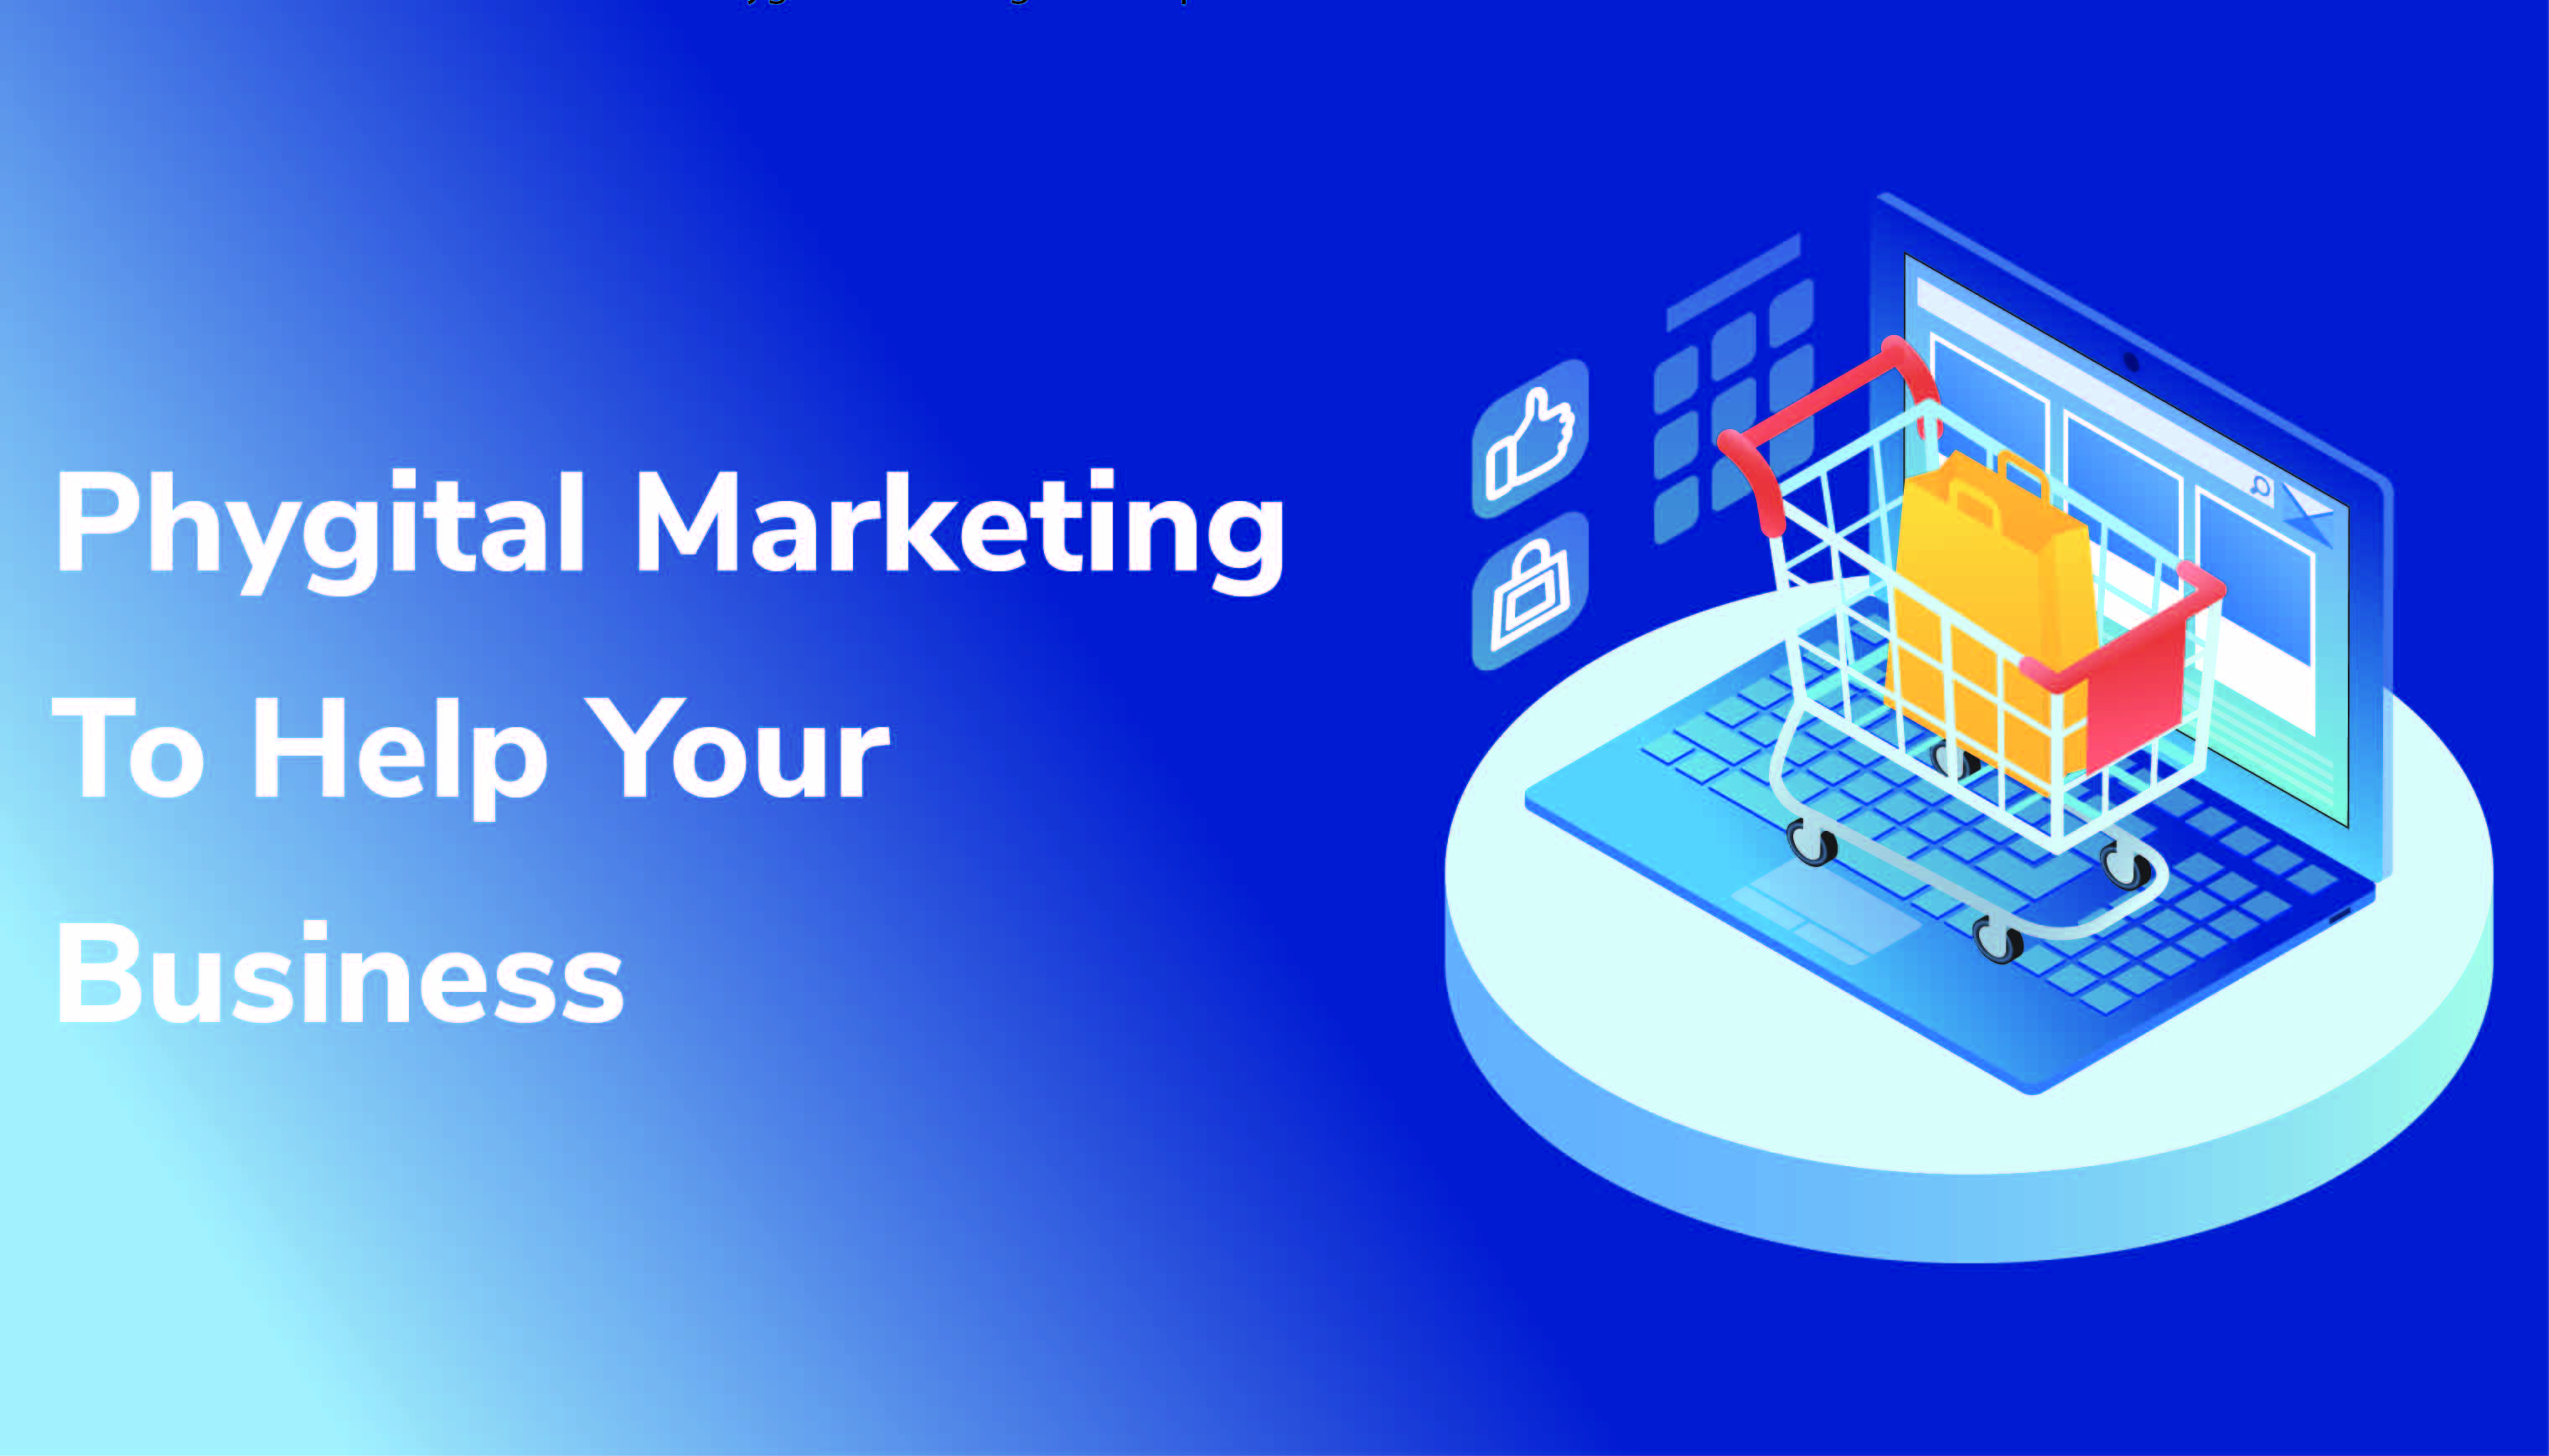 What Is Phygital Marketing? And How Will It Help Your Business